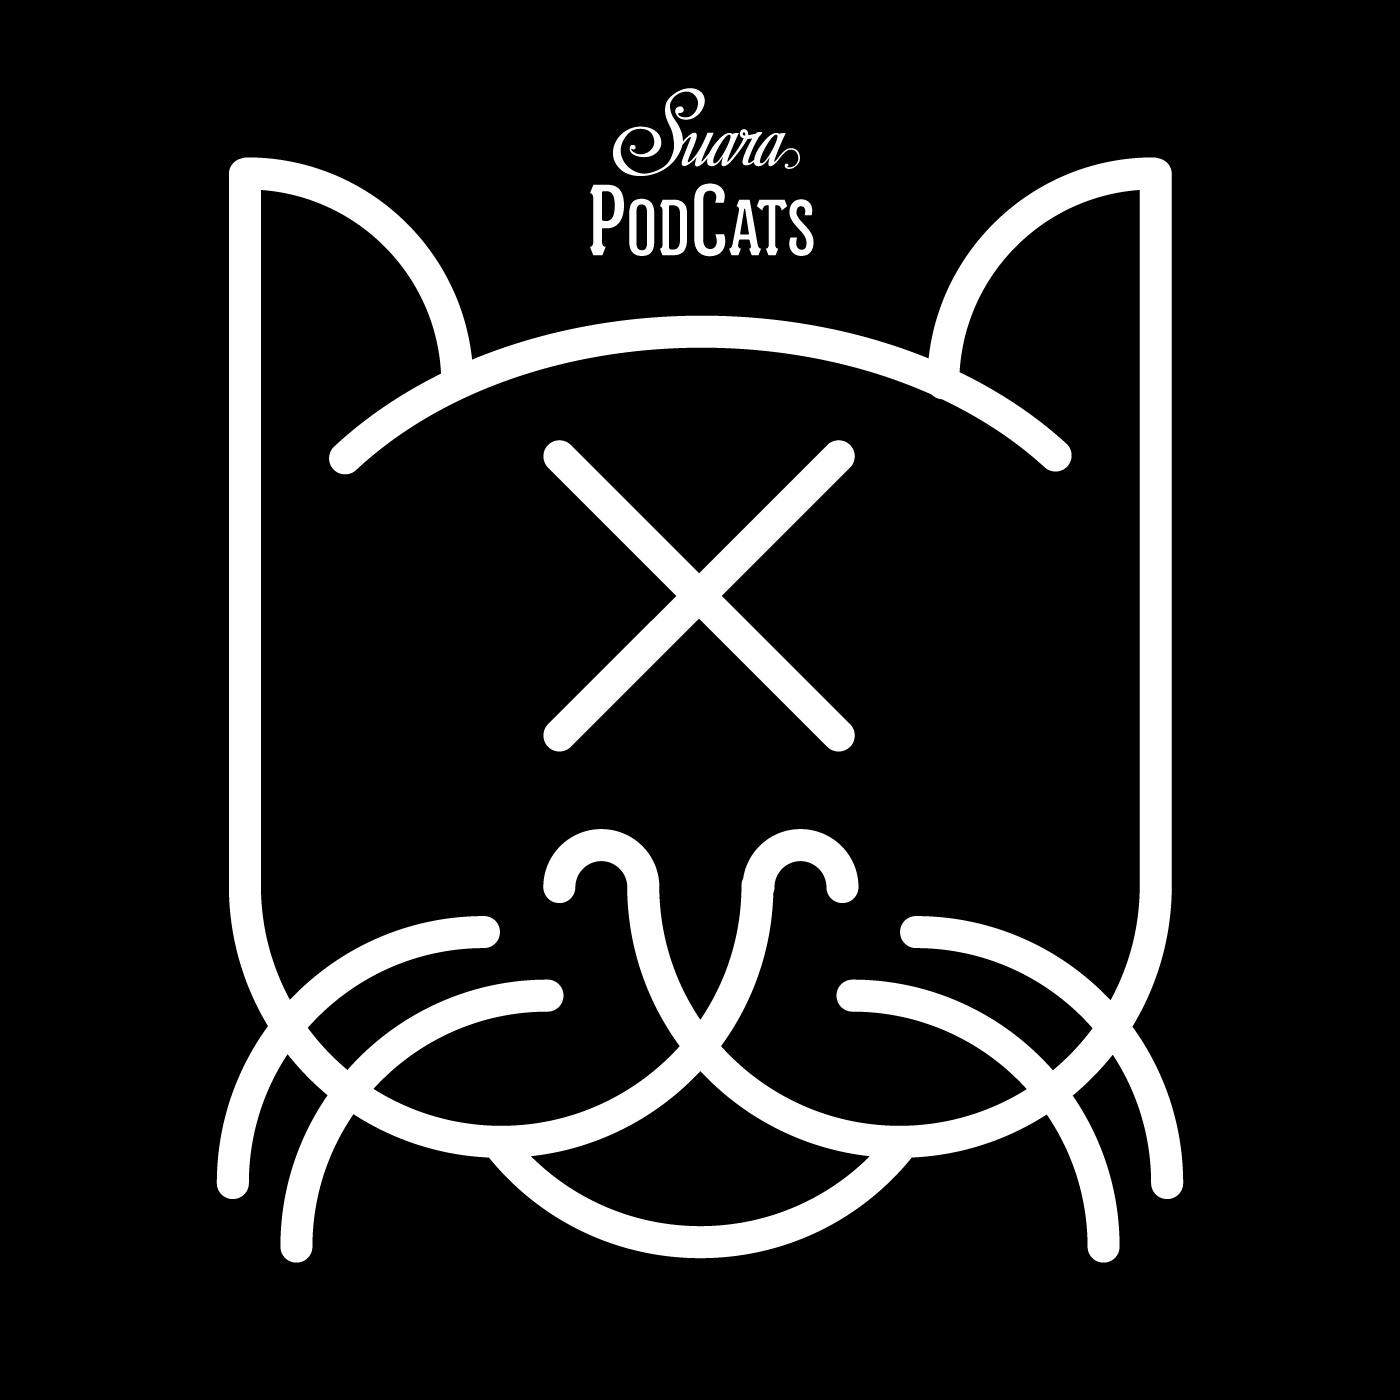 Delta Podcasts - Suara PodCats by Coyu (19.03.2018)